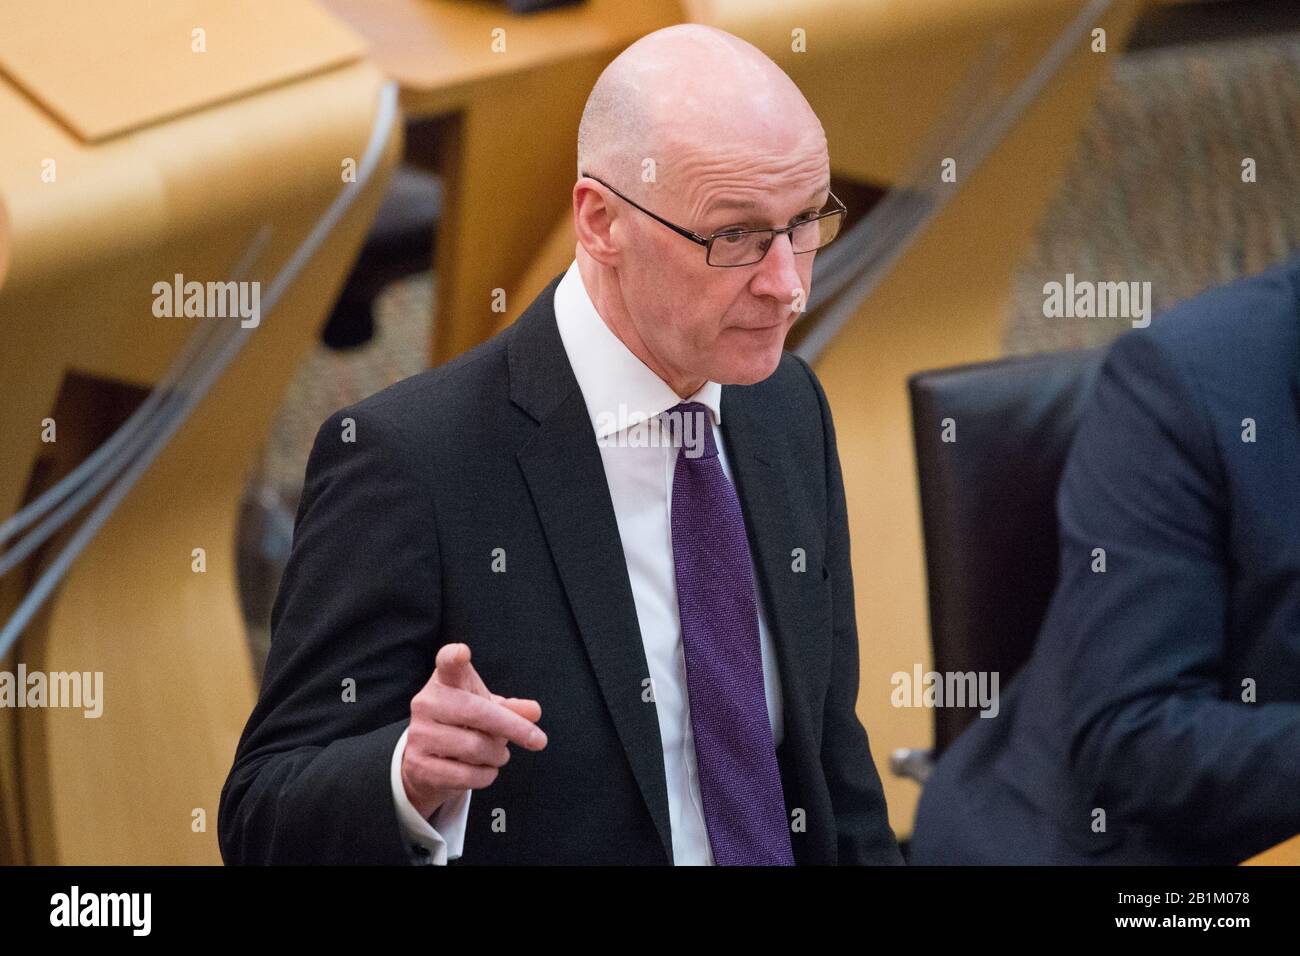 Edinburgh, UK. 26th Feb, 2020. Pictured: John Swinney MSP - Depute First Minister and Cabinet Secretary for Education of the Scottish National Party (SNP). Education and Skills general questions being put to John Swinney who is defending the Scottish Governments record on Education. Credit: Colin Fisher/Alamy Live News Stock Photo